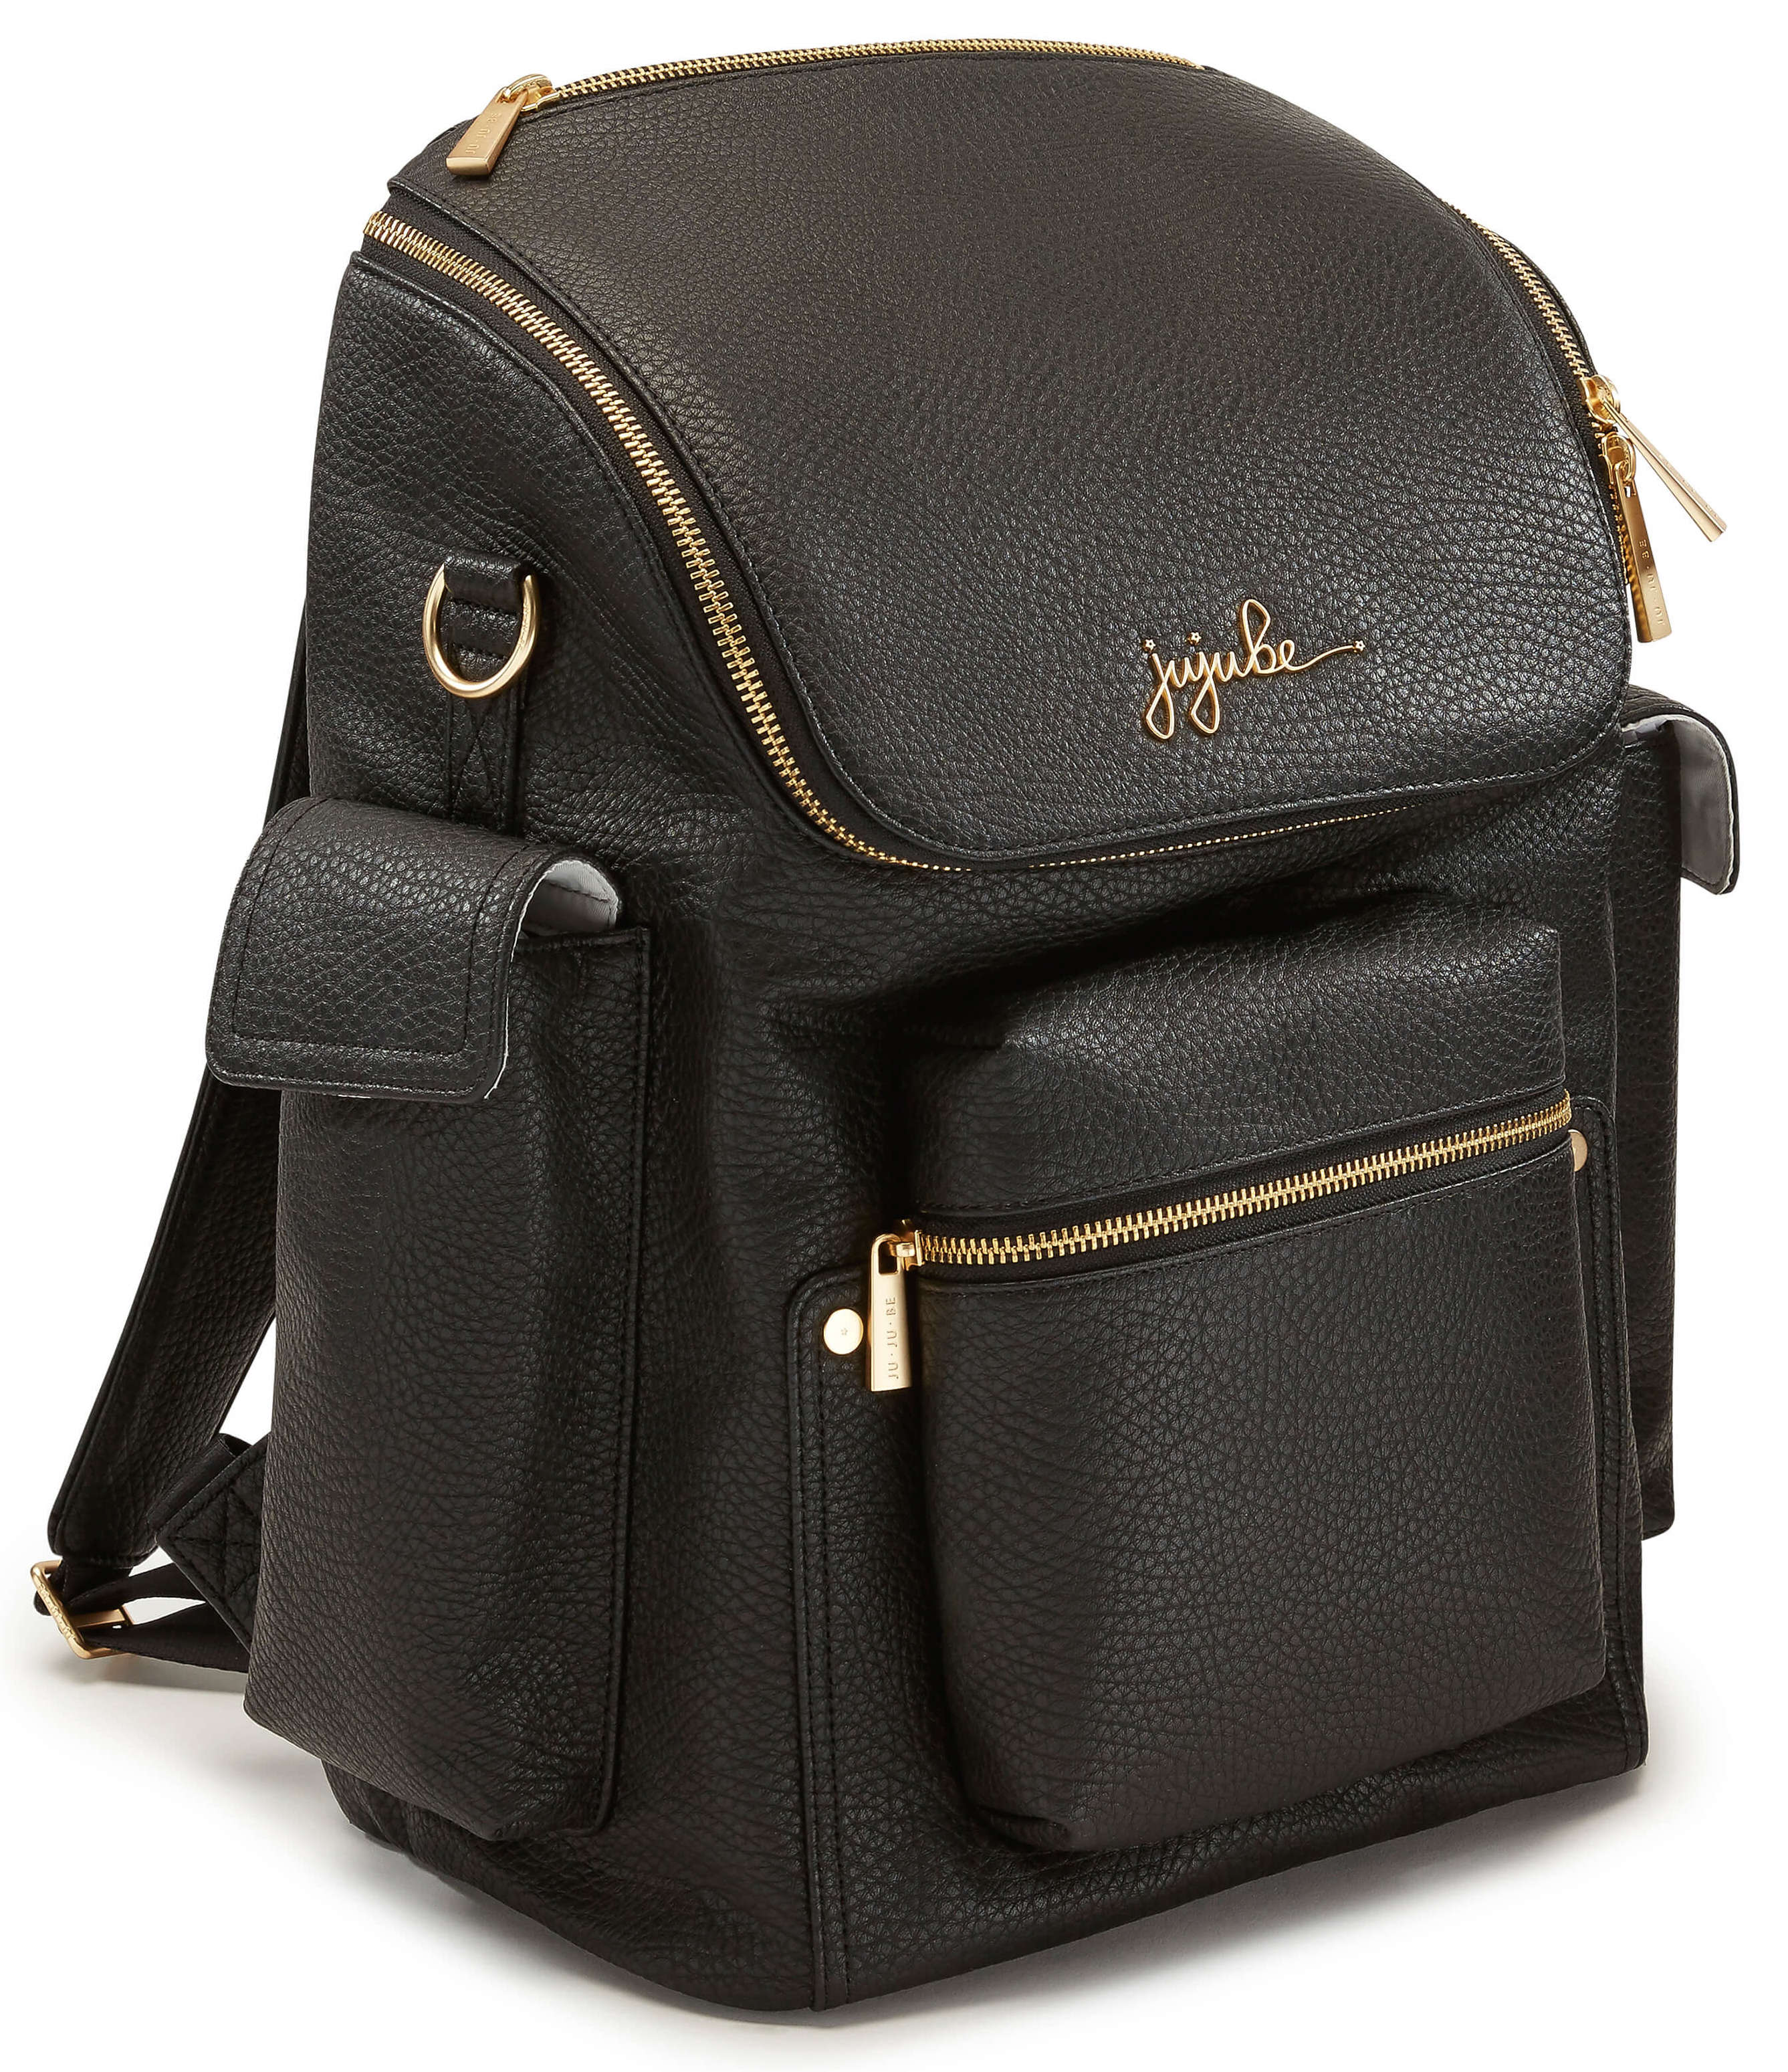 Buy JuJuBe Forever Backpack Noir from Canada at Well.ca - Free Shipping